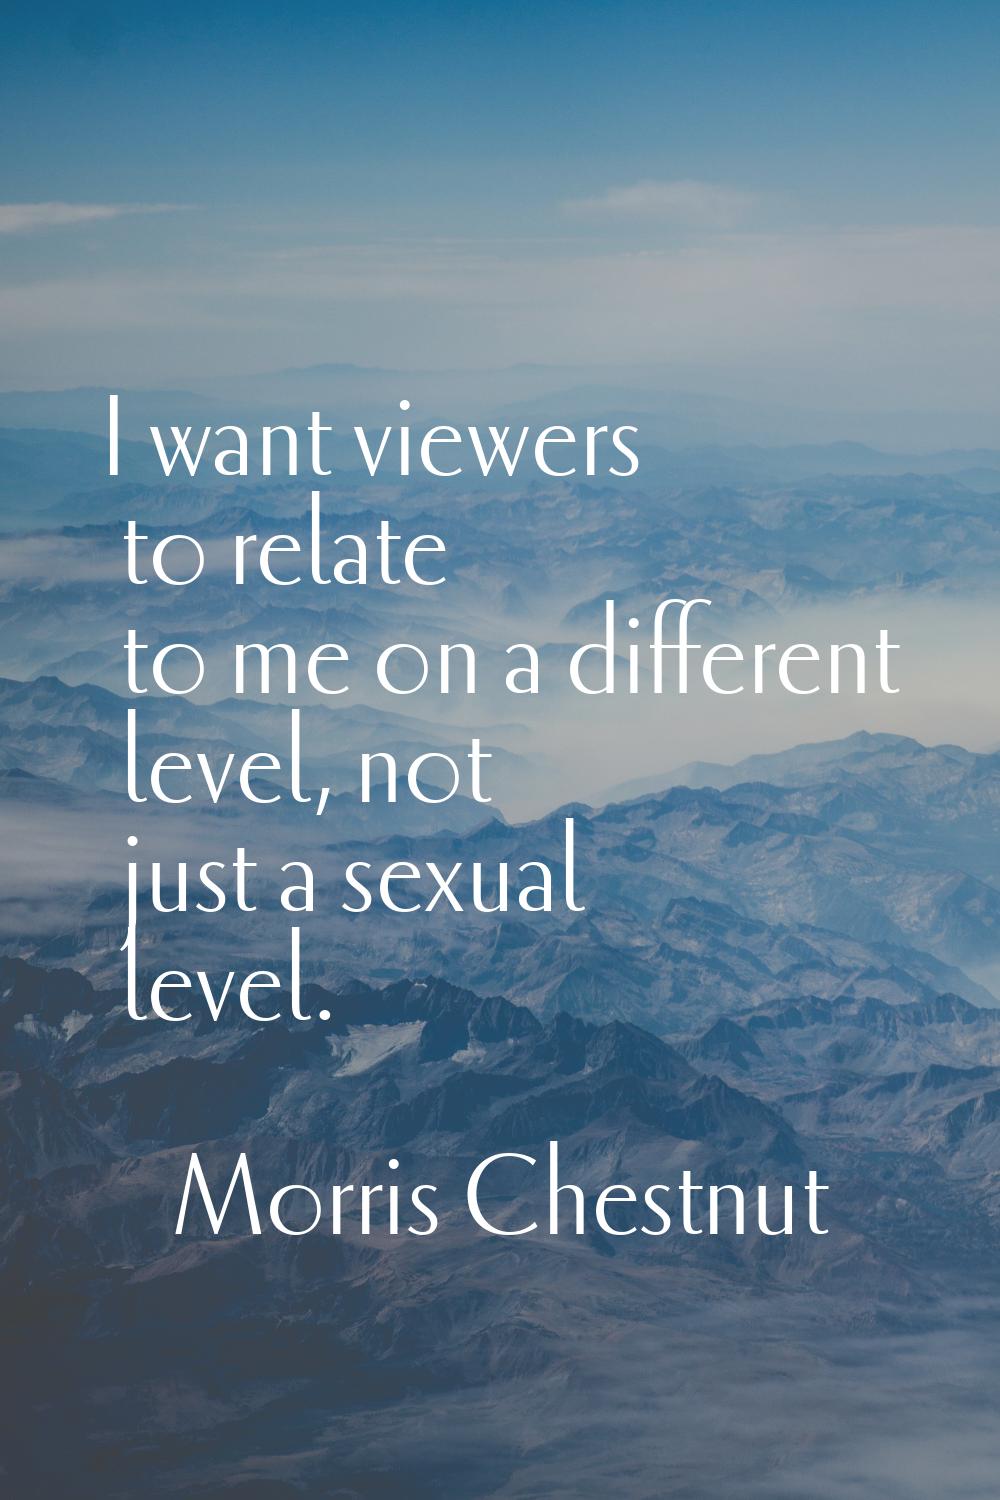 I want viewers to relate to me on a different level, not just a sexual level.